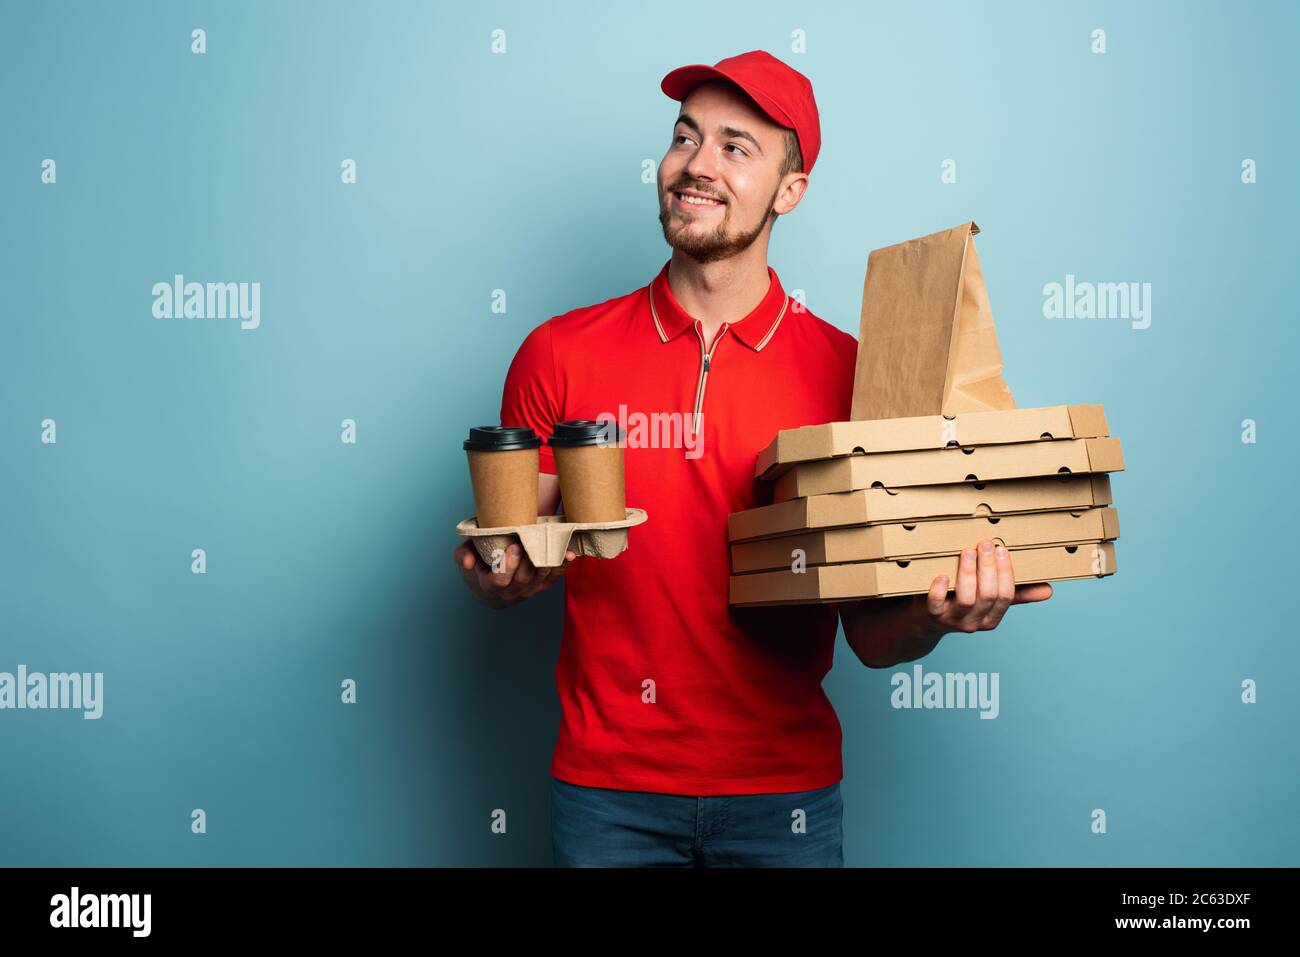 Courier is happy to deliver hot coffee,pizza and food. Cyan background Stock Photo